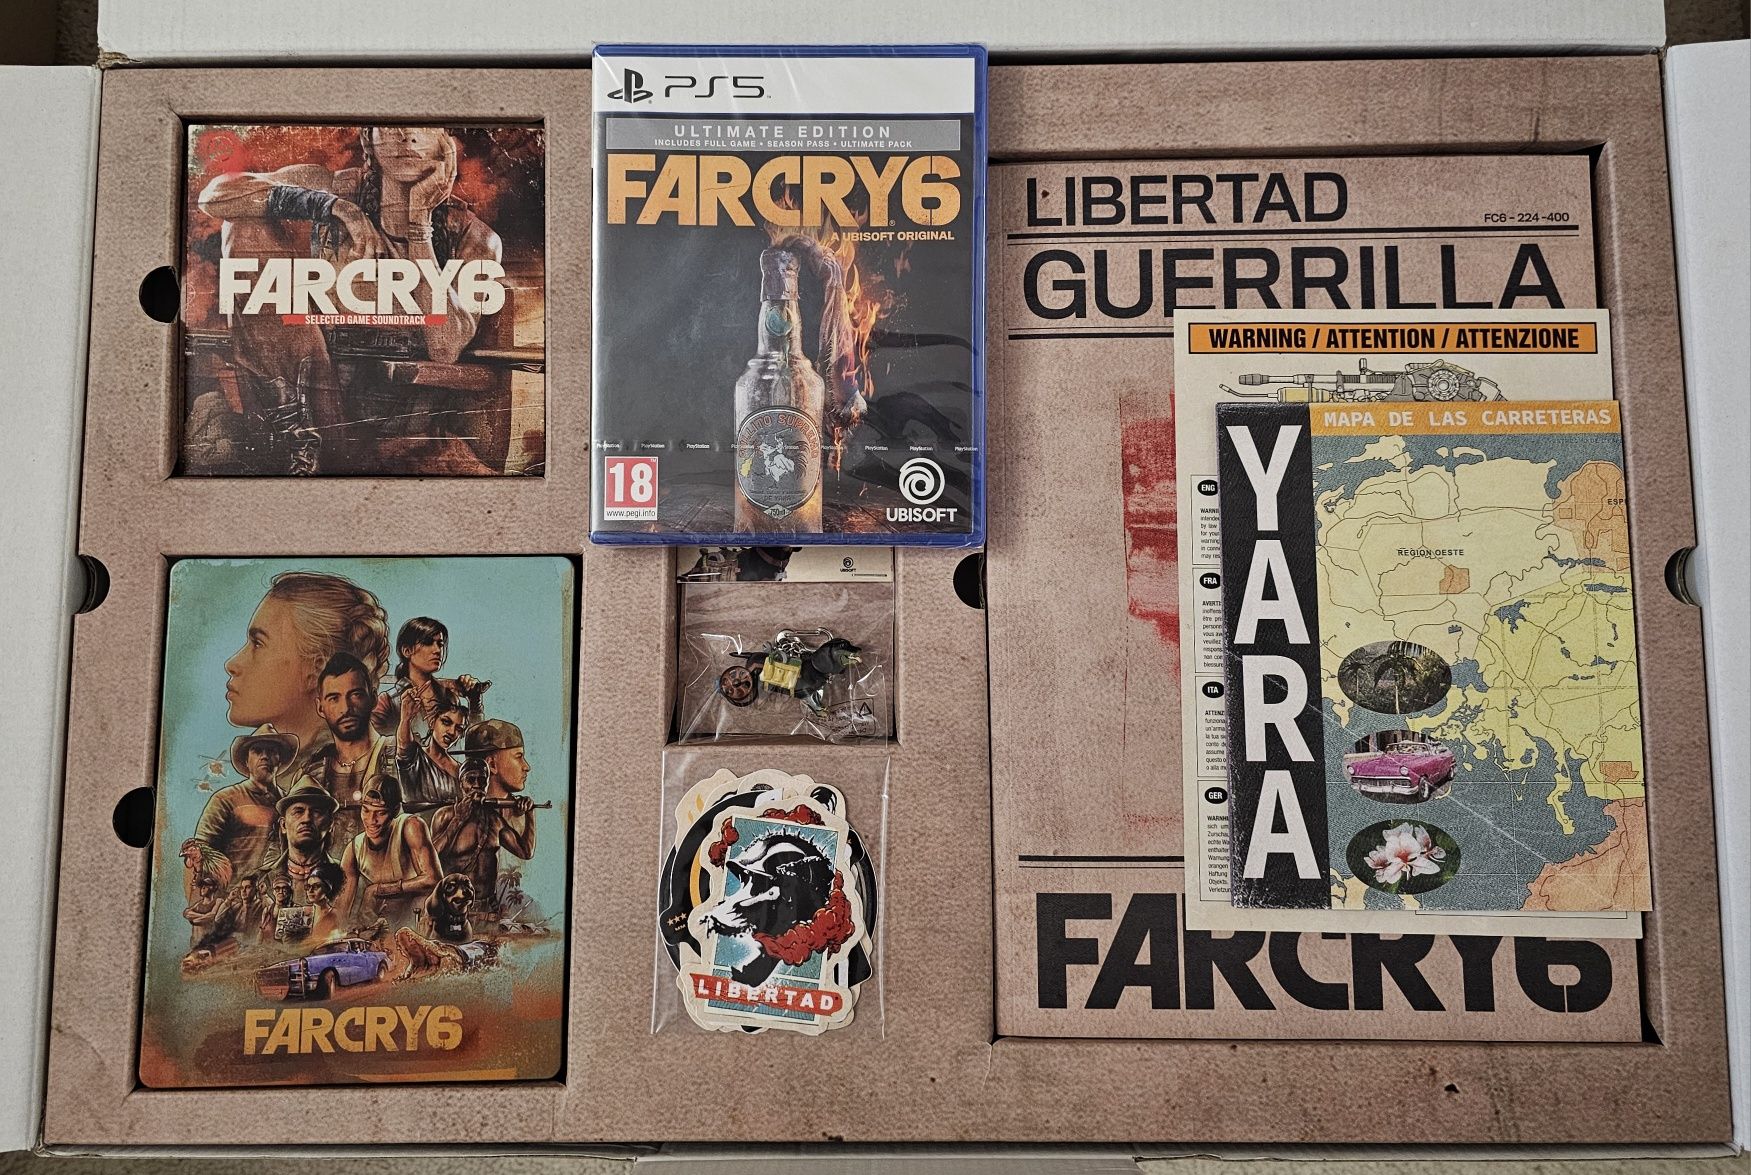 Farcry 6 Collector's Edition PS5